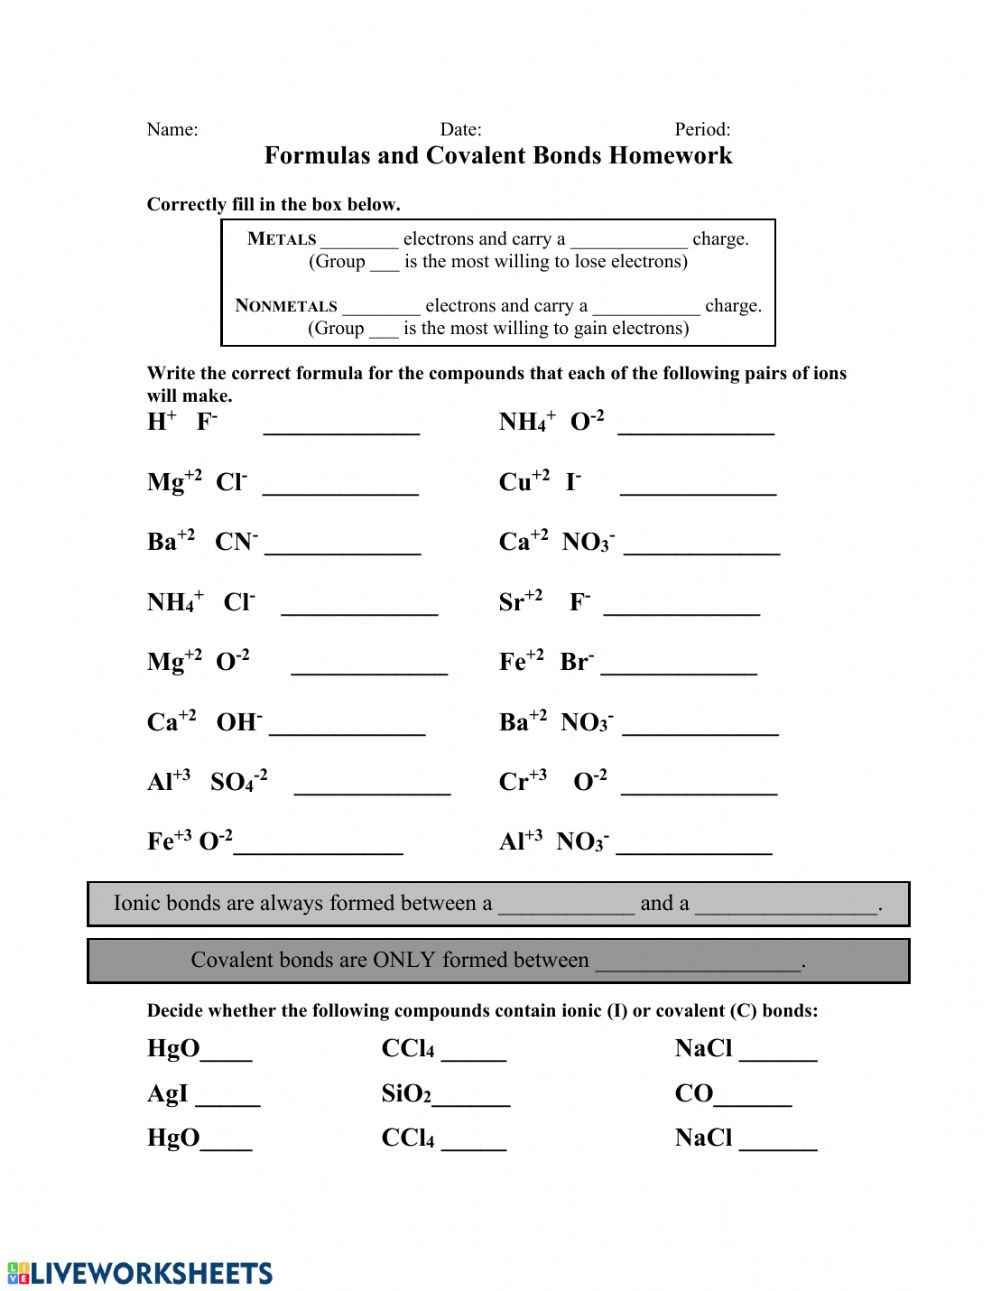 Worksheet Polarity Of Bonds Answers formulas and Covalent Bonds Interactive Worksheet